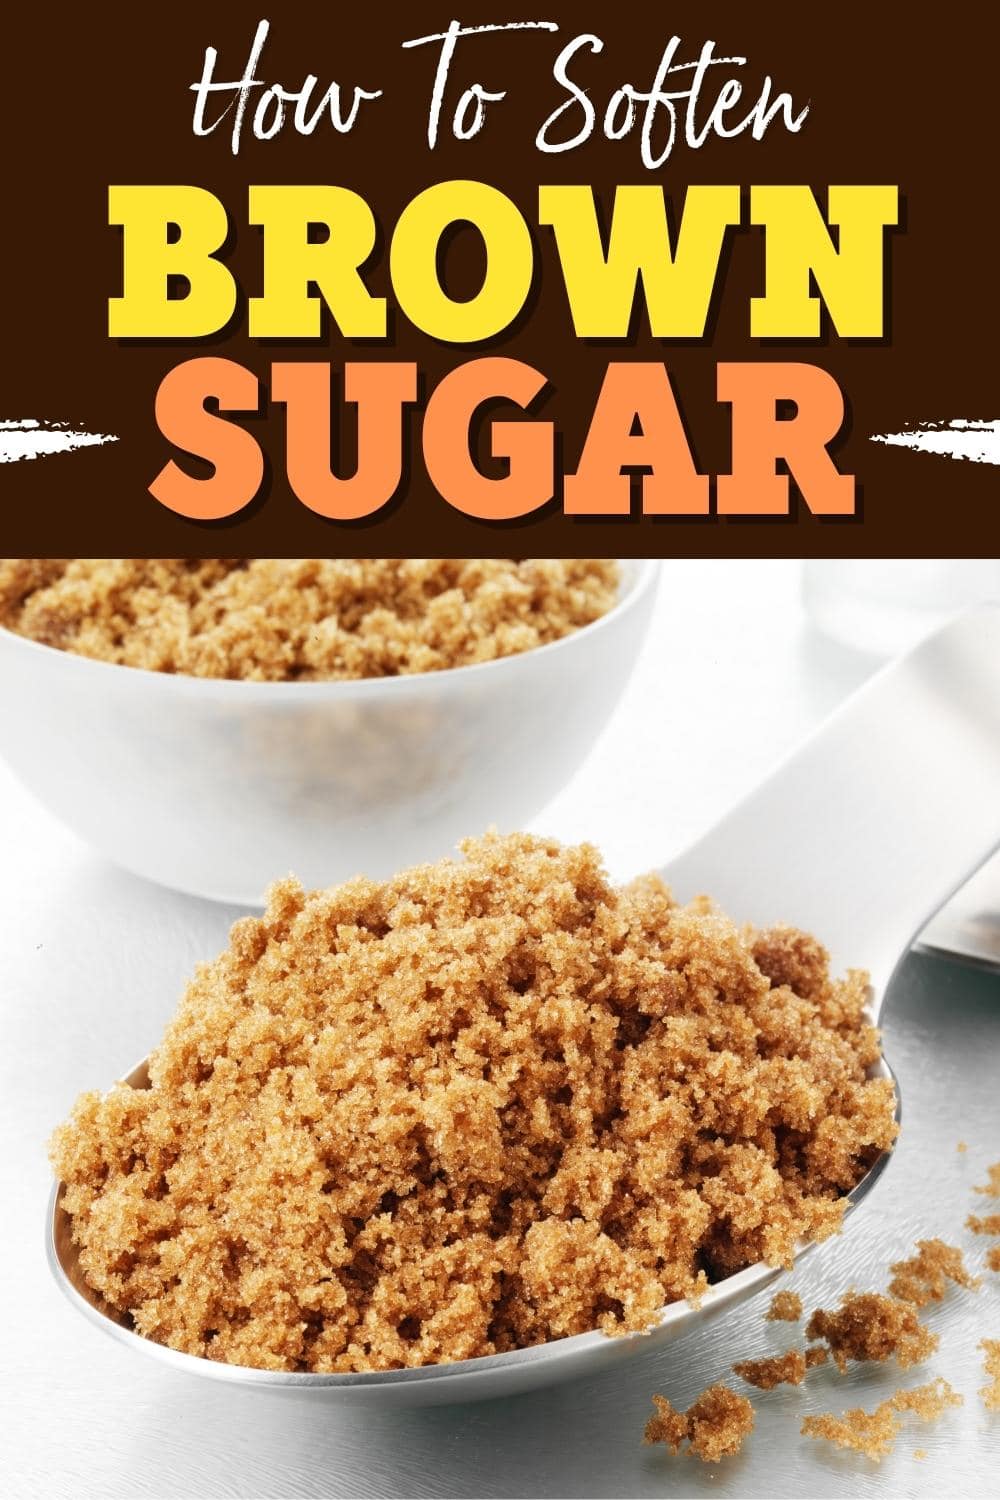 How to Soften Brown Sugar (5 Easy Ways) - Insanely Good